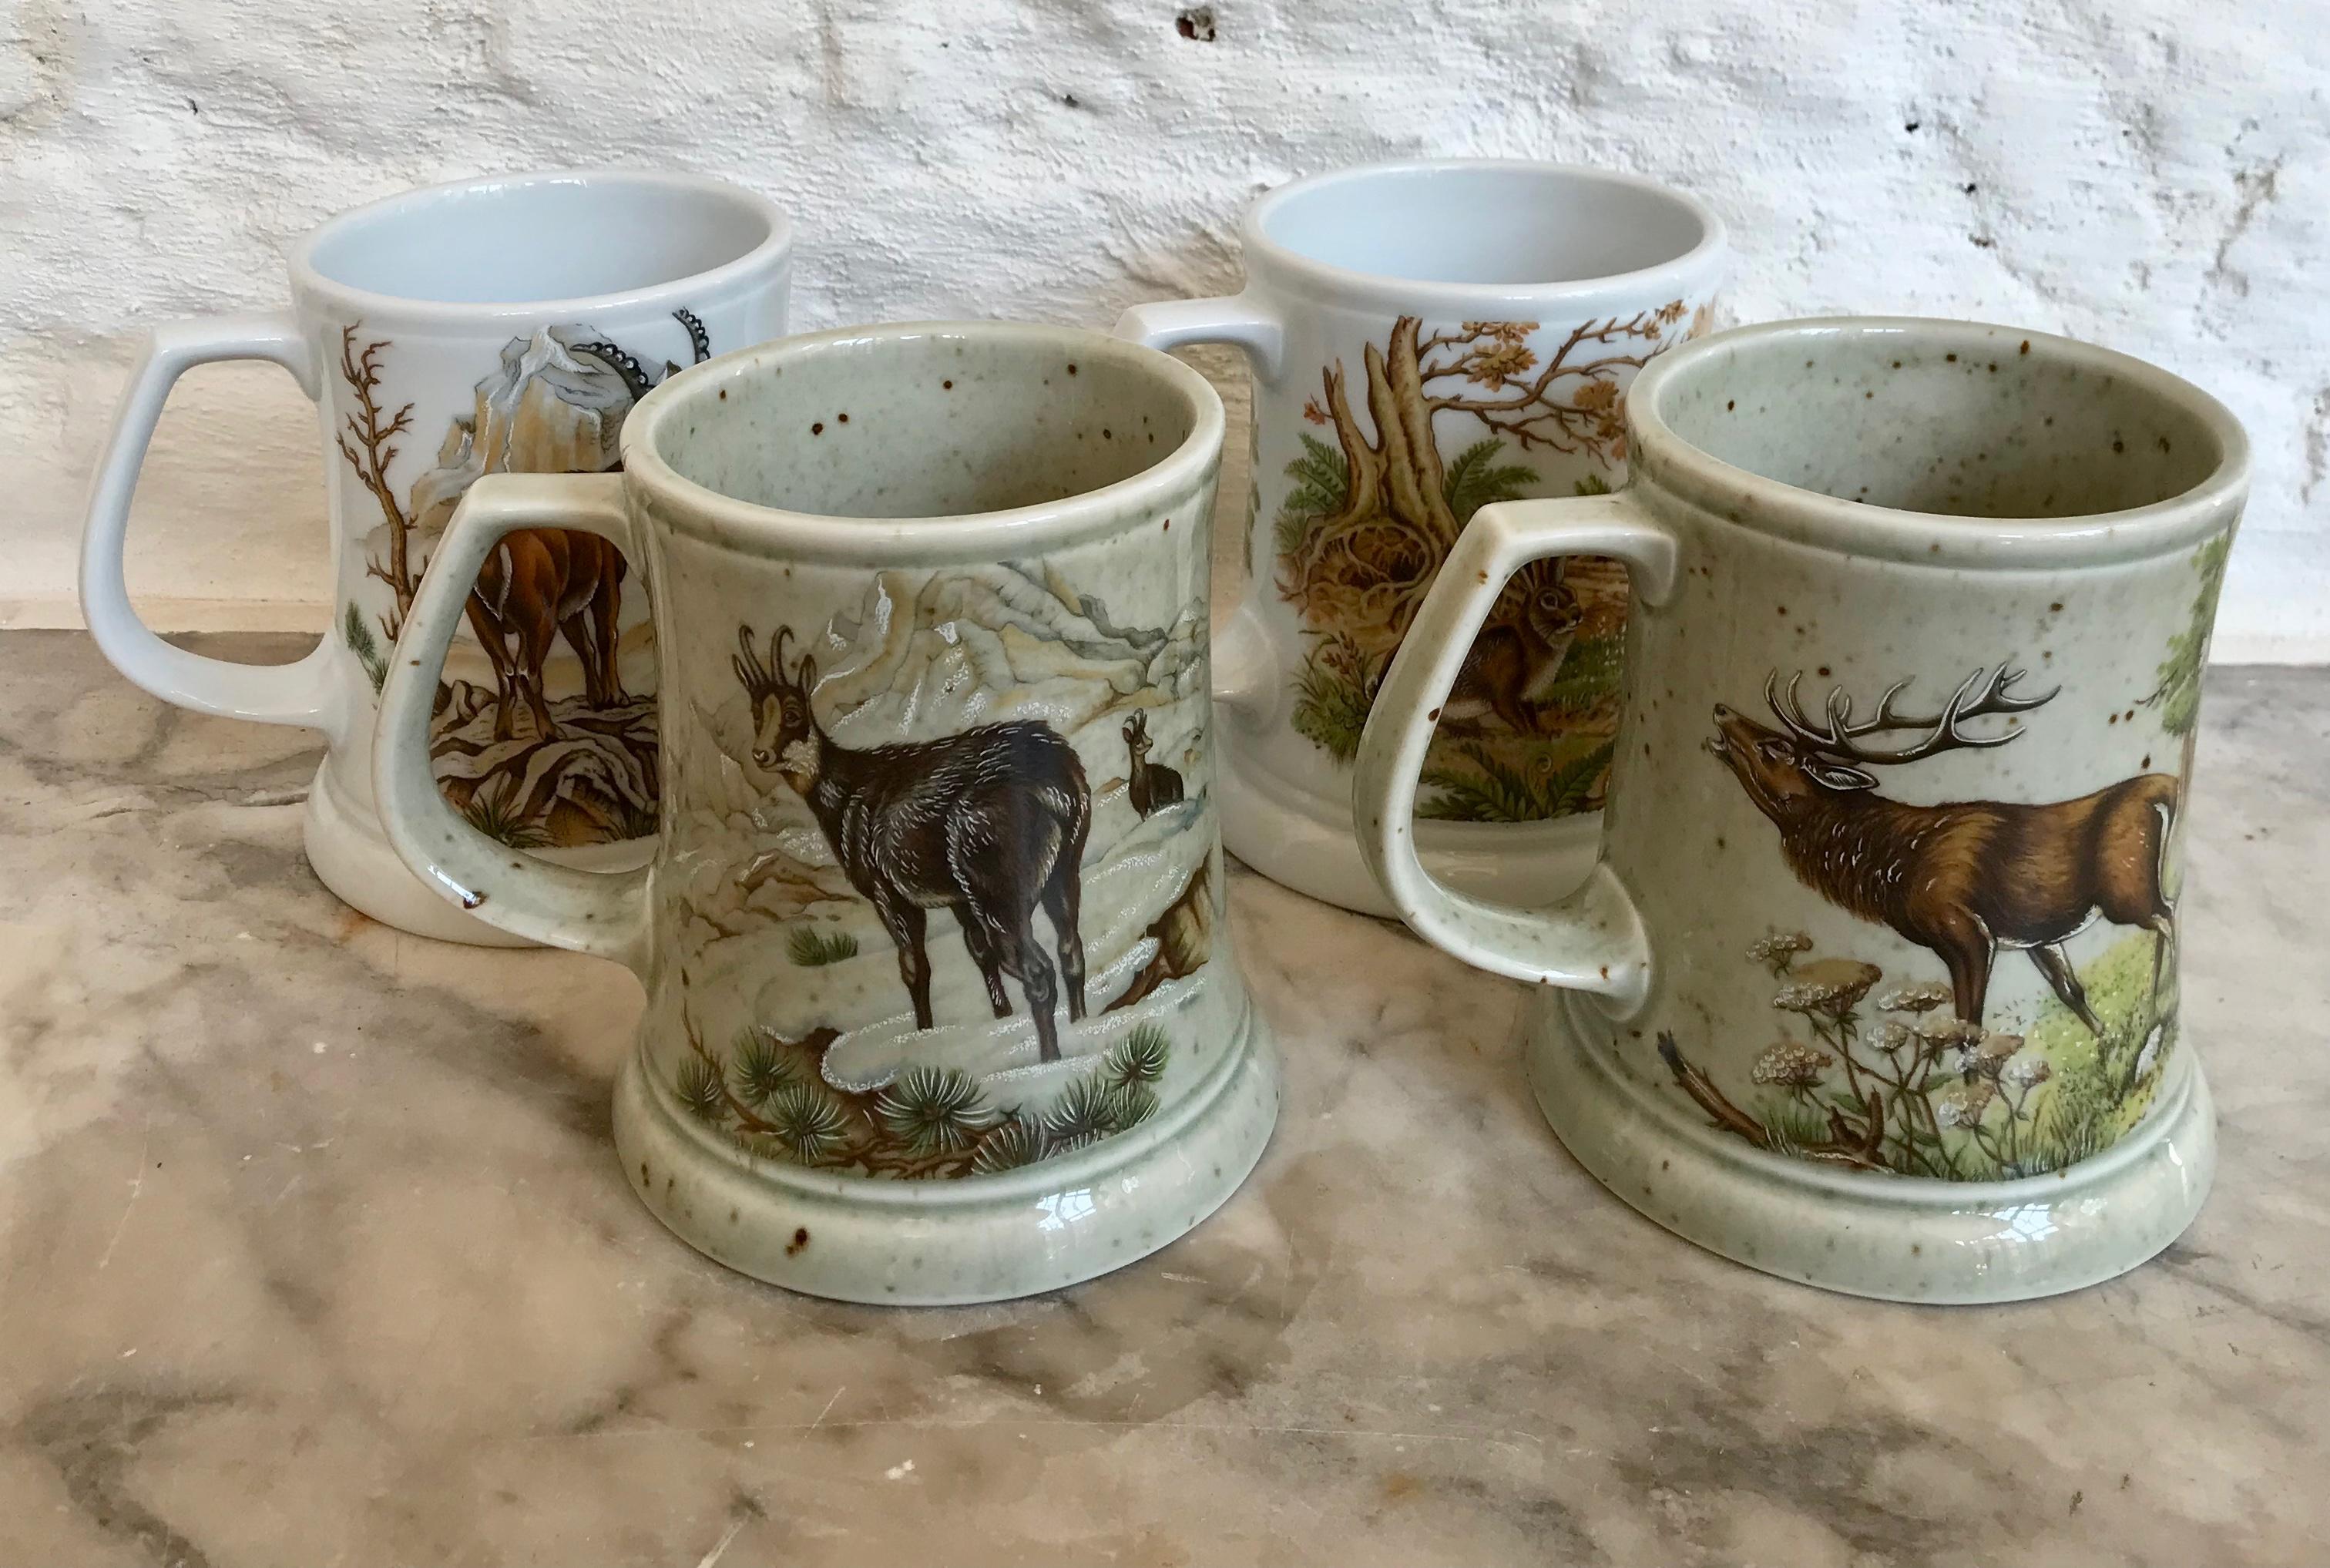 A set of four German hand painted mugs, circa 1970 marked 